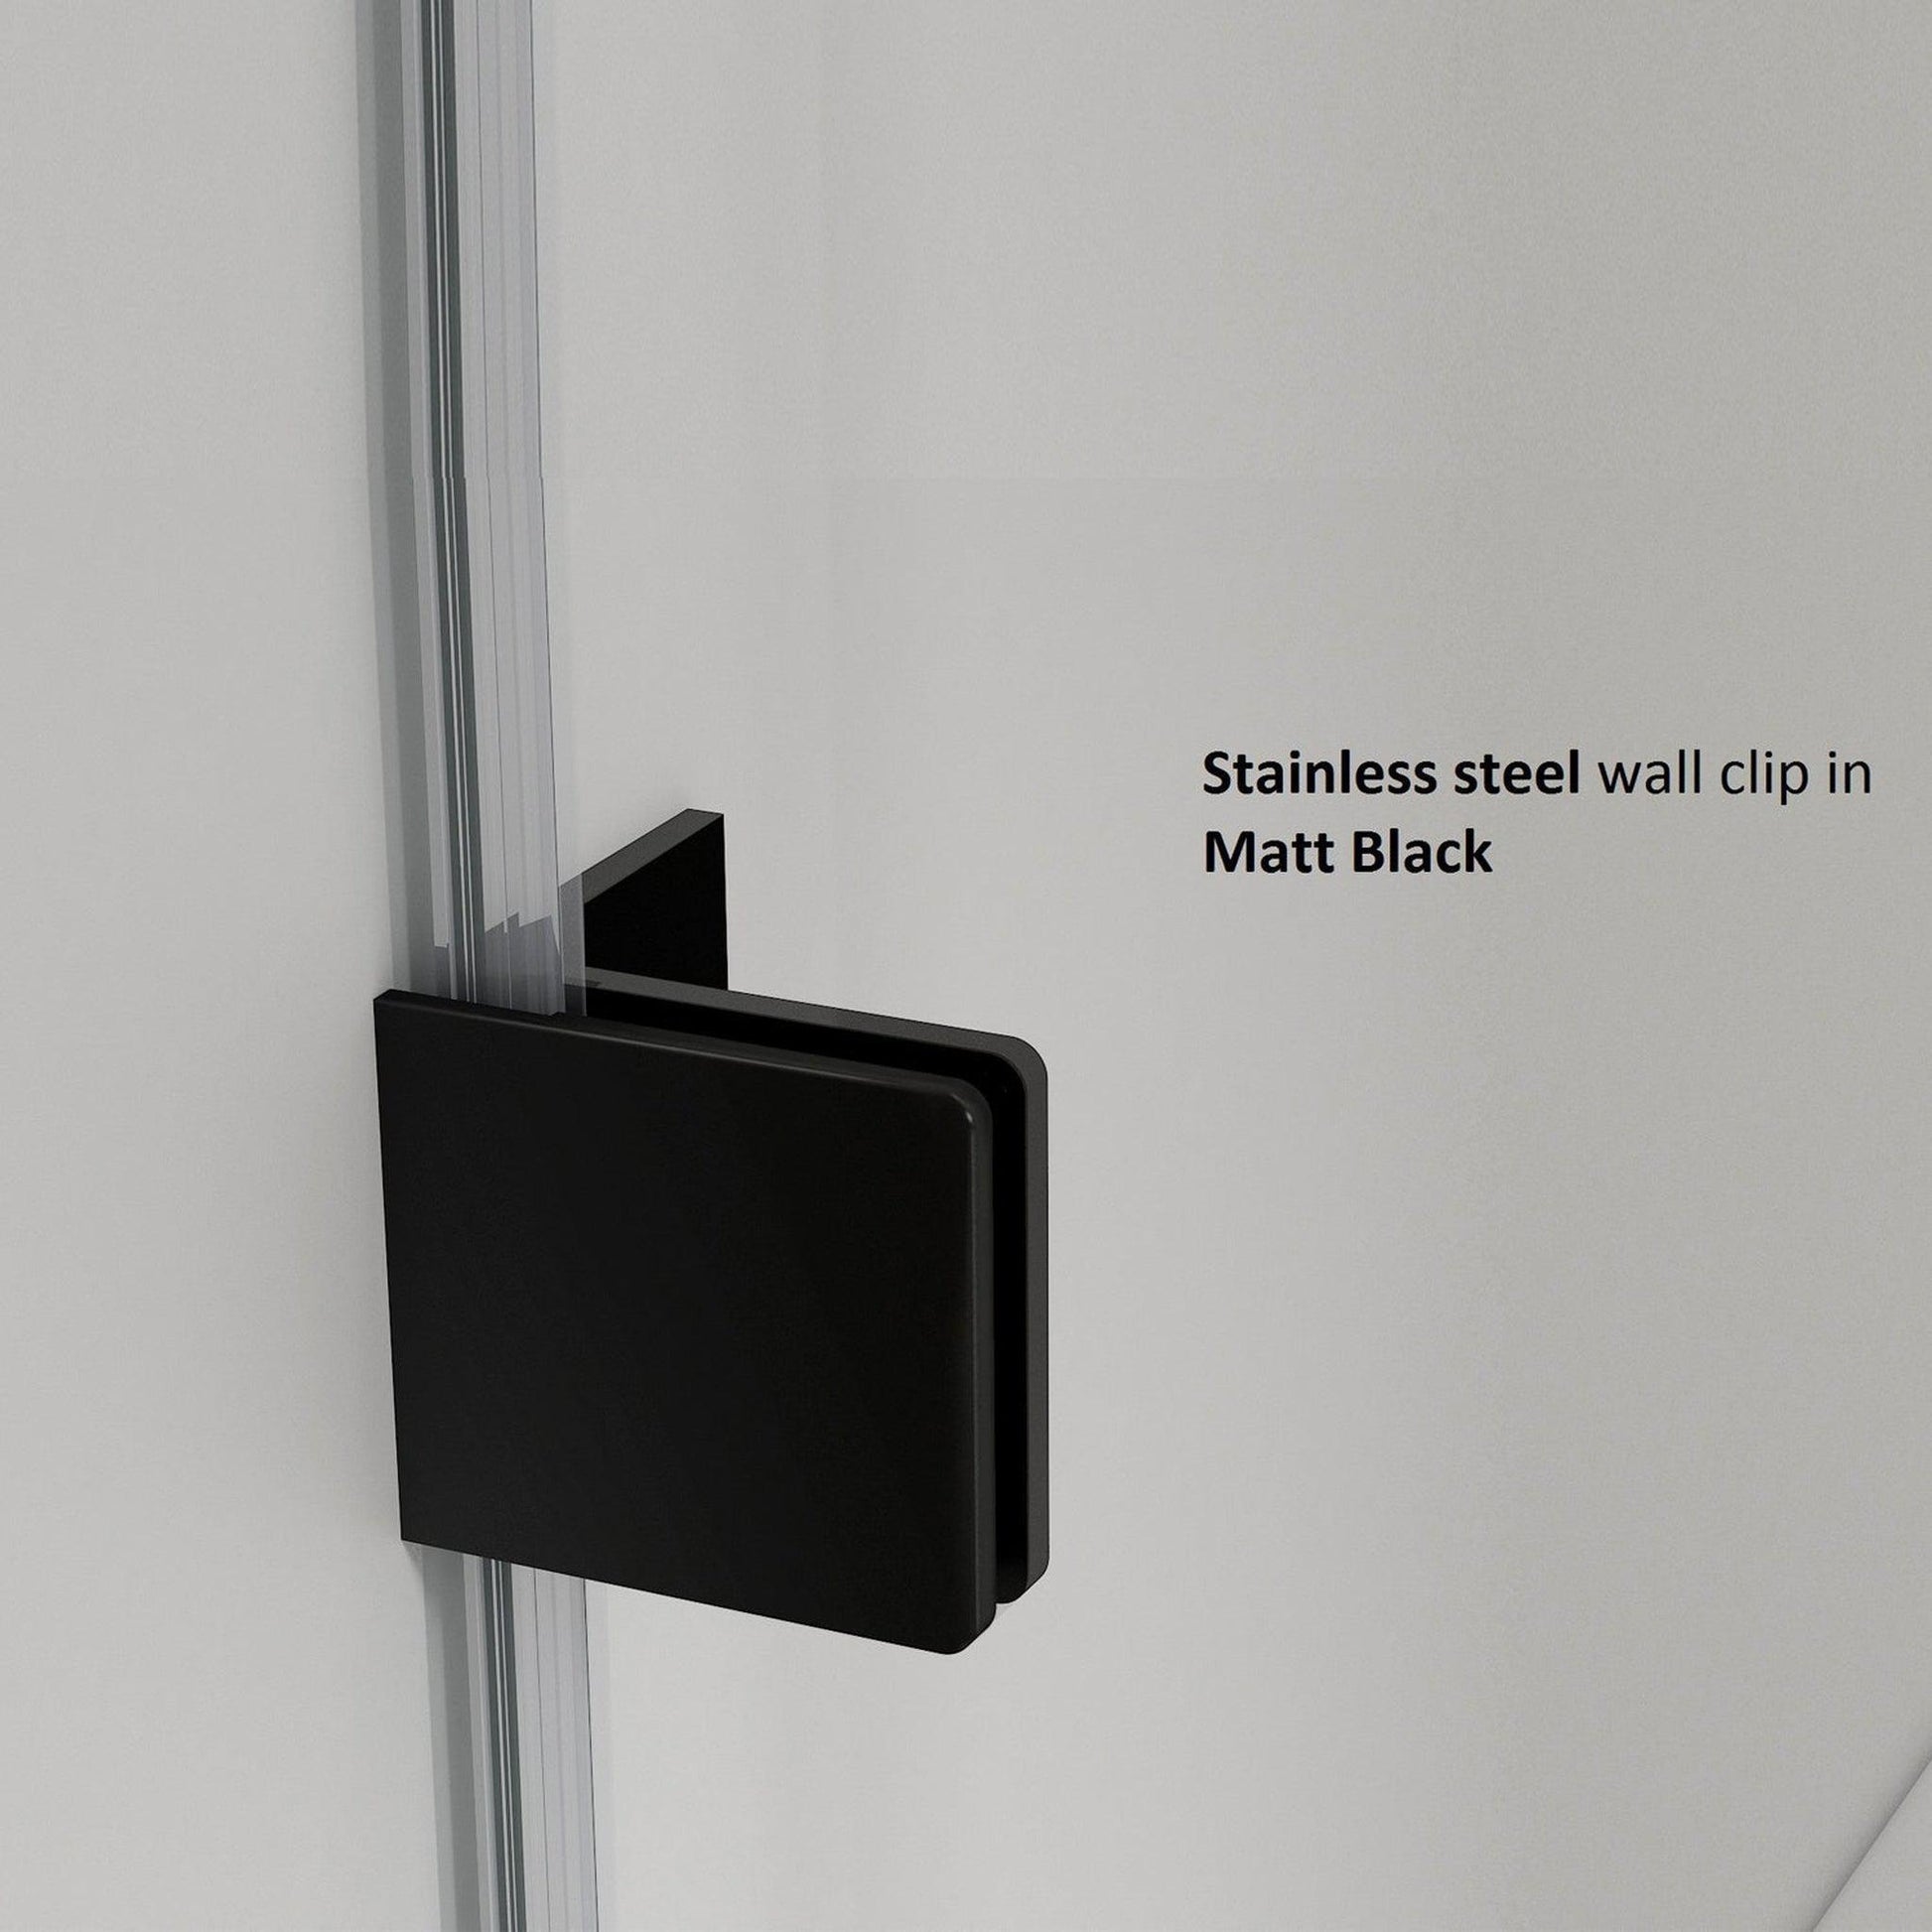 Vinnova Milano 66" x 72" Matte Black In-line Hinged Frameless Shower Door With Fixed Glass on Both Sides